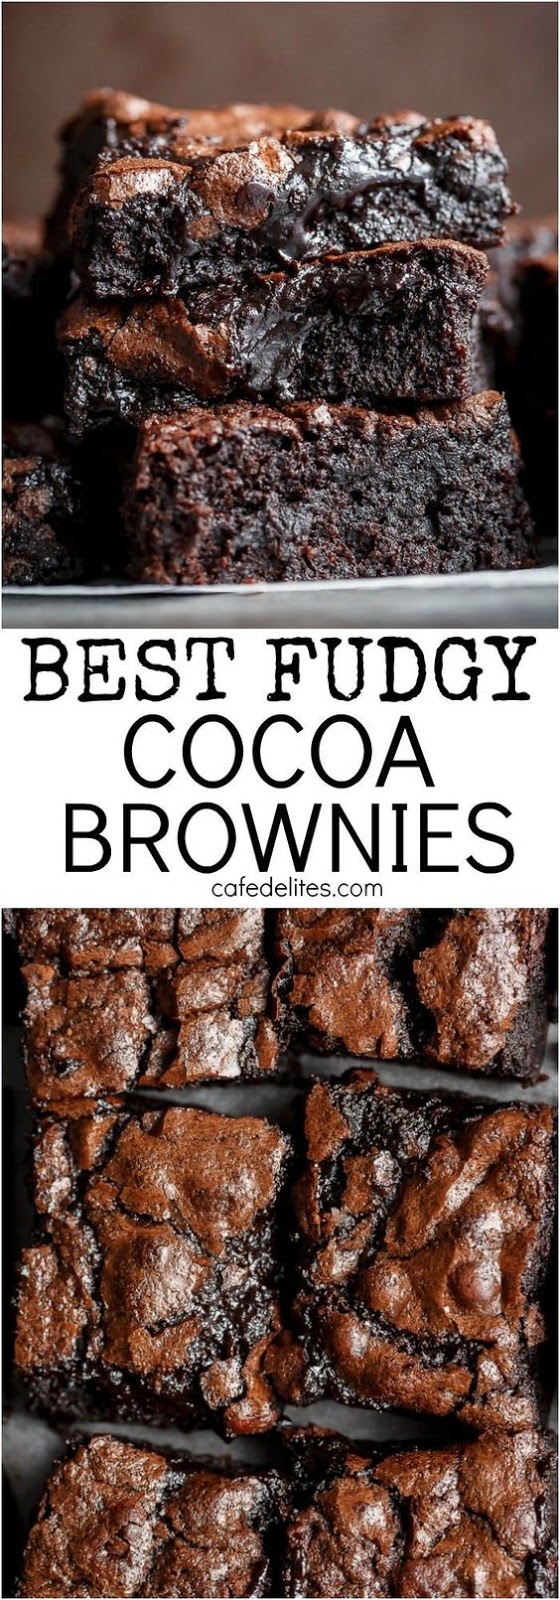 Super fudgy and at the same time crispy, this cocoa brownie recipe is best in the world. Learn the recipe!